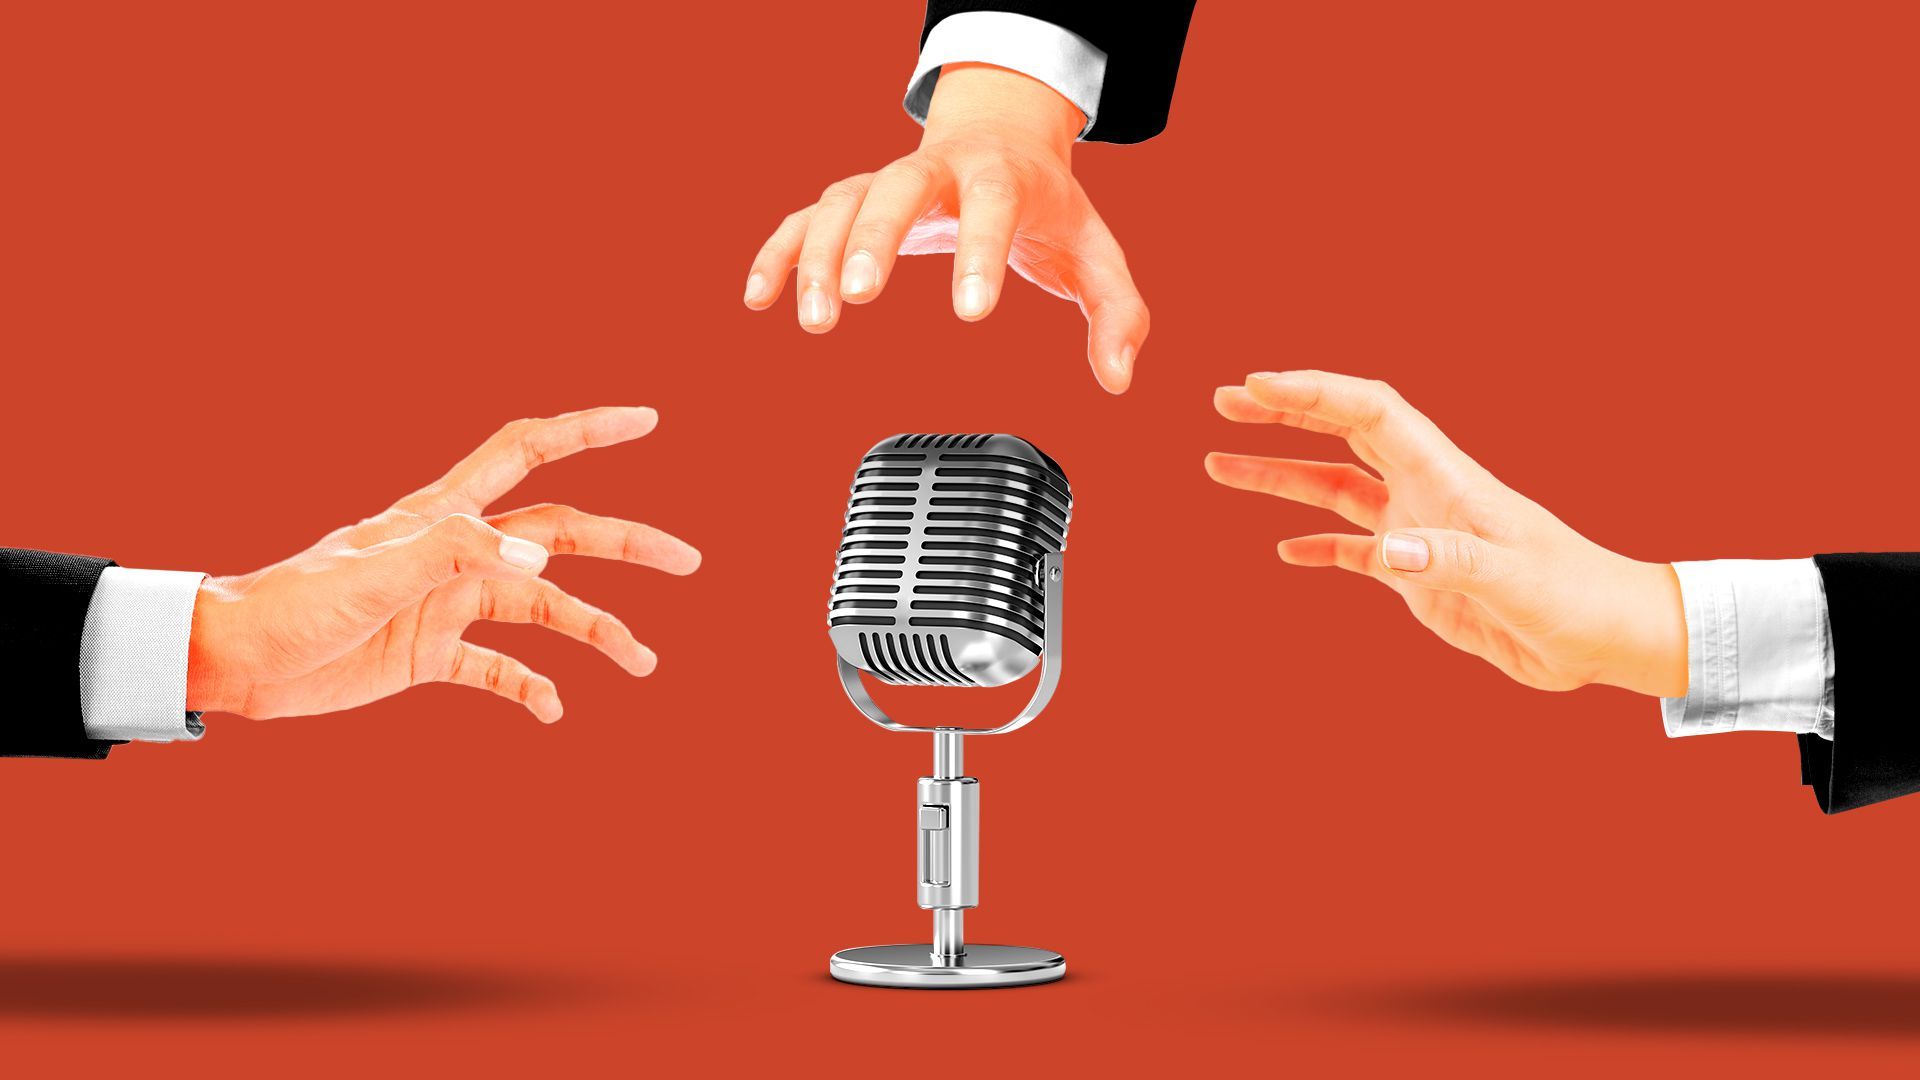 Illustration of hands reaching out for an old fashioned microphone. 